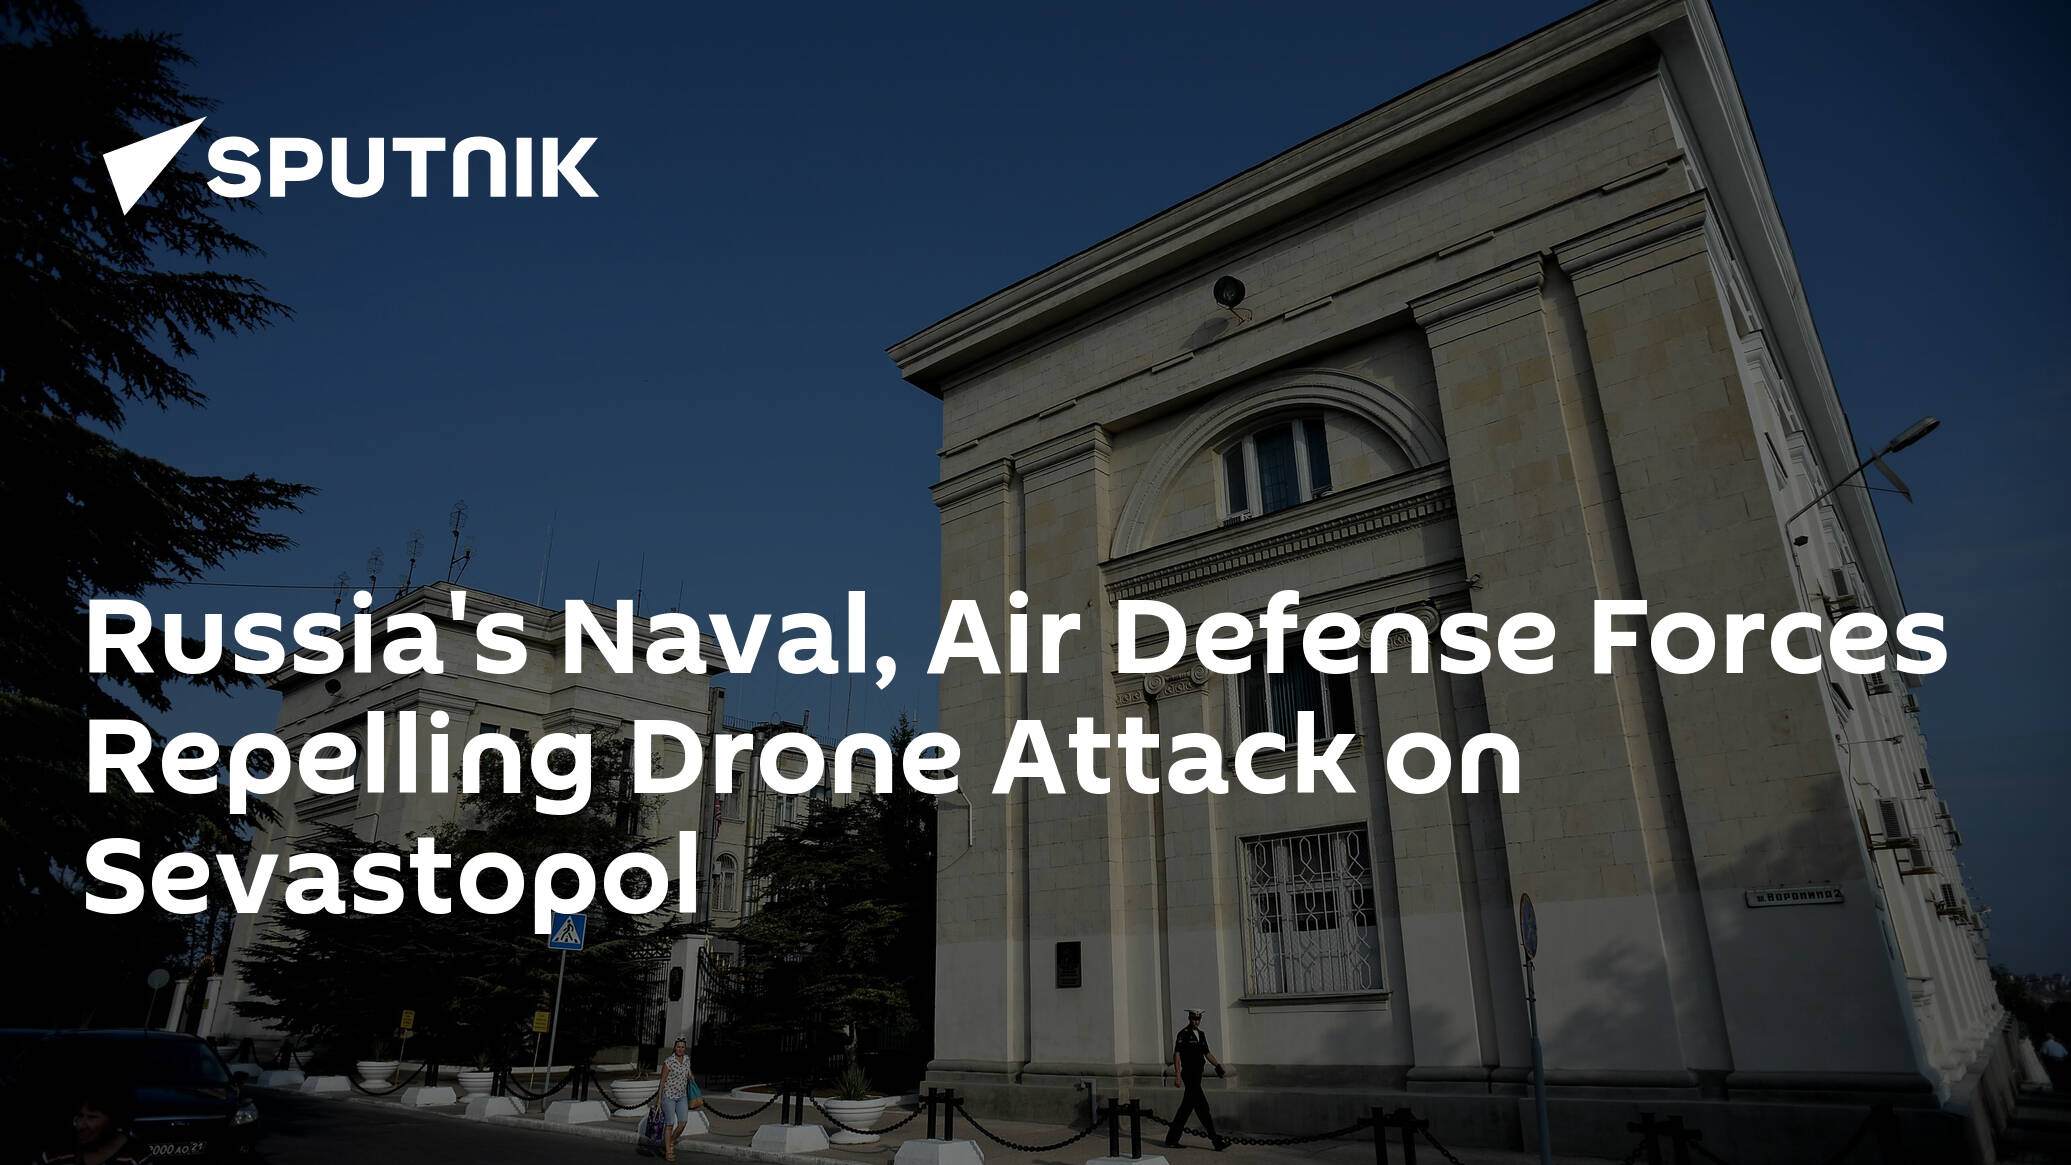 Russia's Naval, Air Defense Forces Repelling Drone Attack on Sevastopol